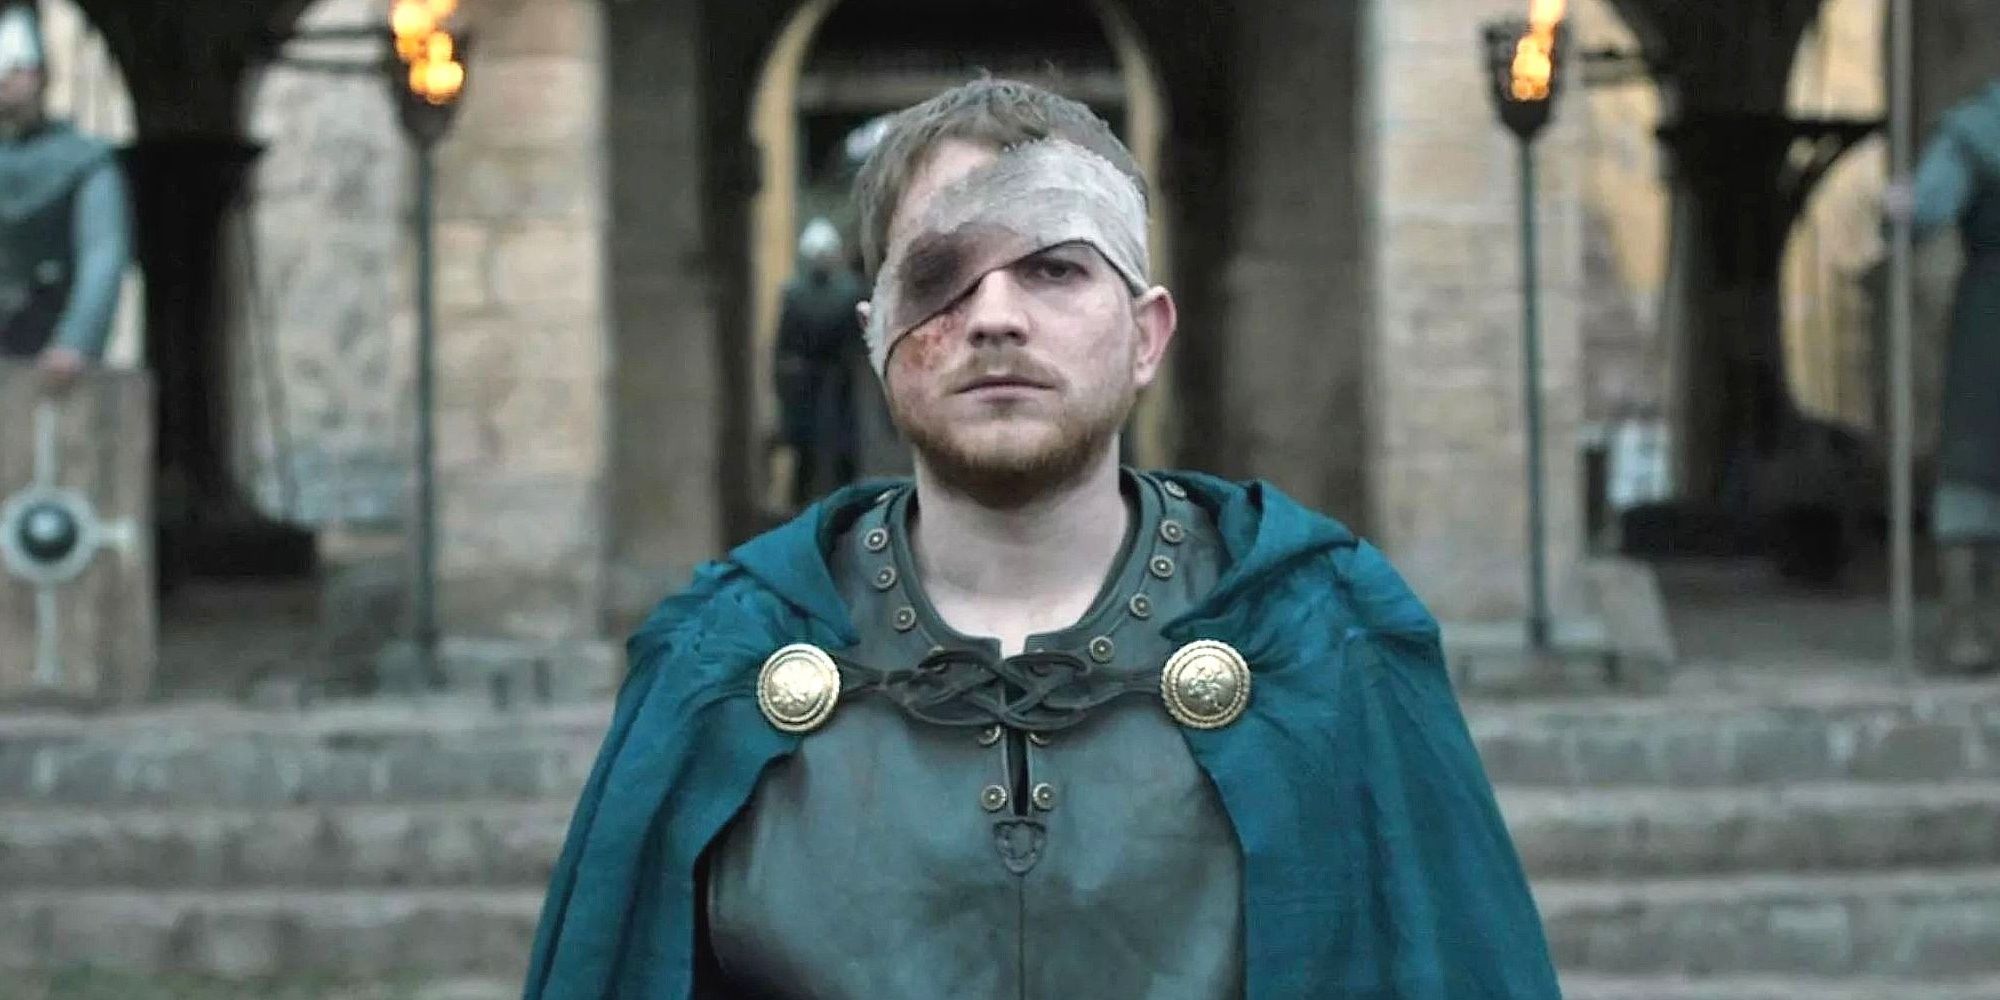 An image of Aethelwold with an injured eye in The Last Kingdom